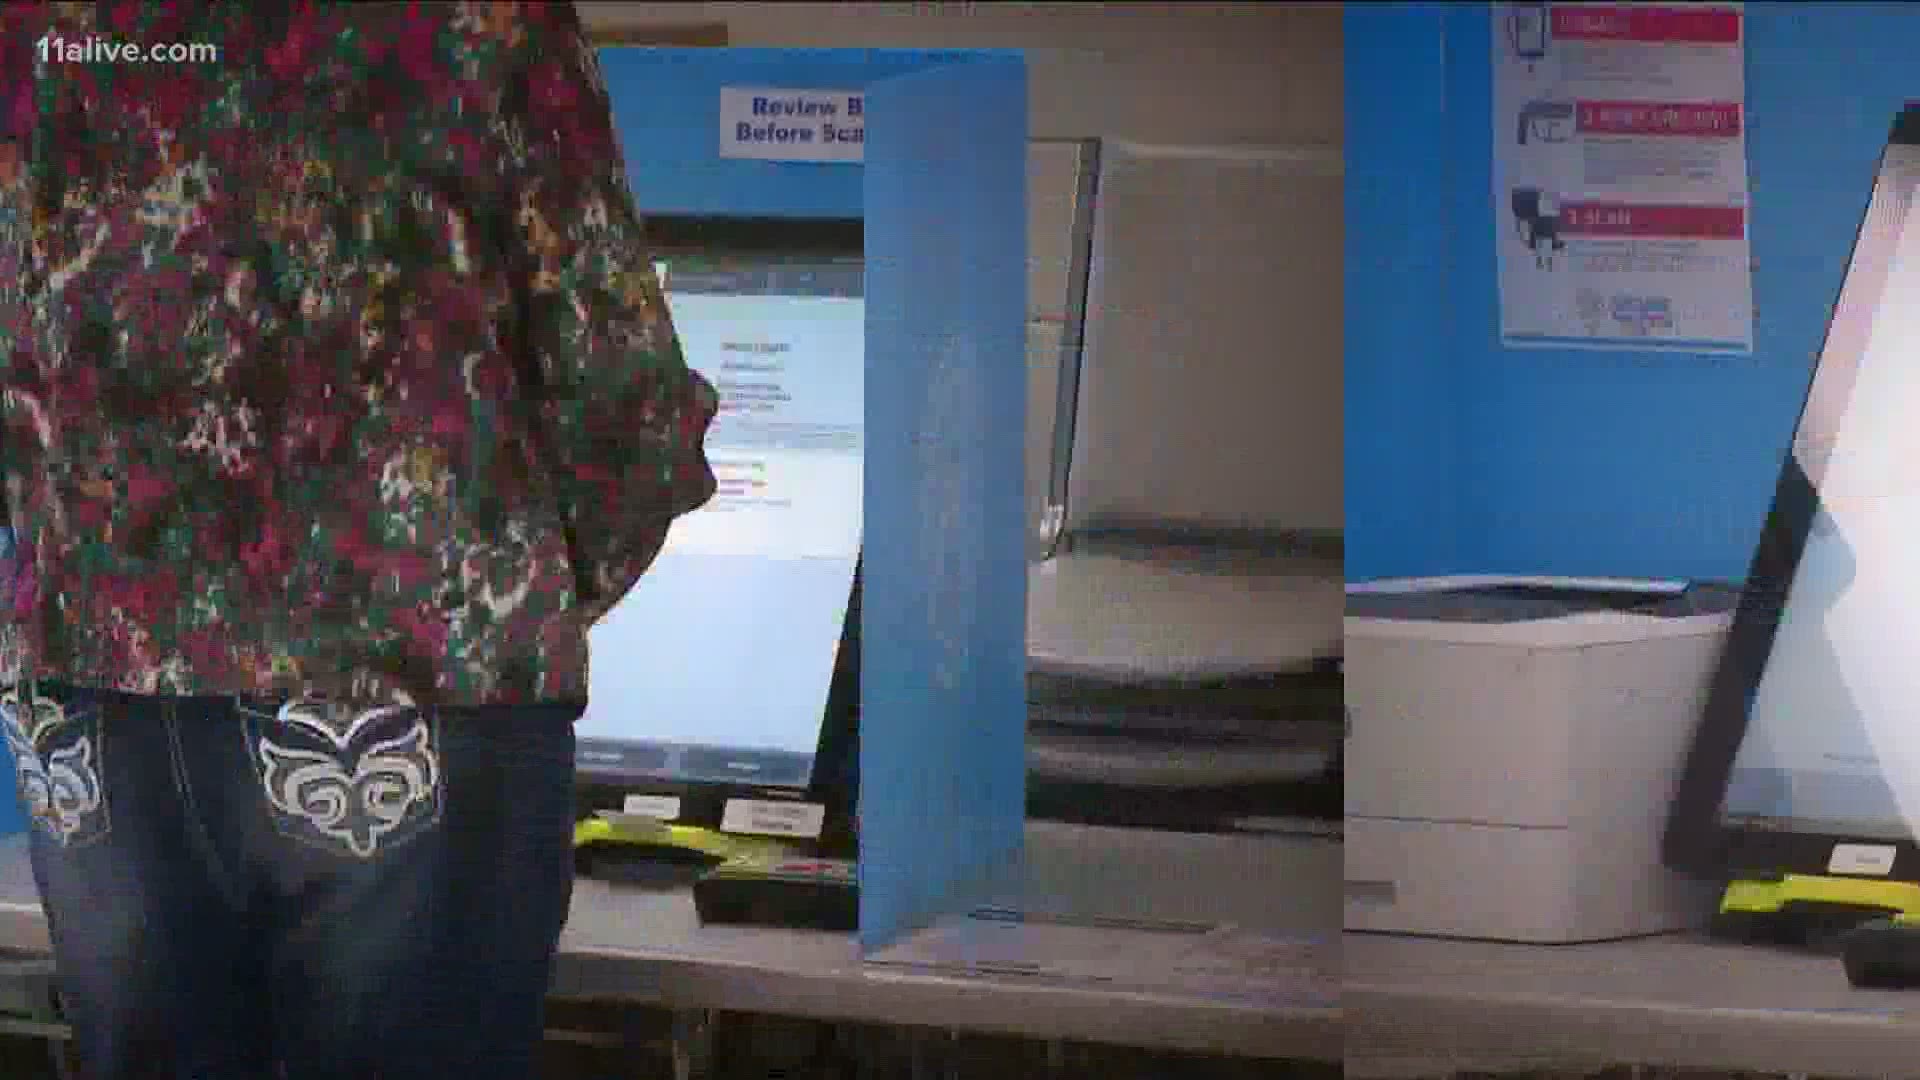 11Alive talks to local elections officials about ways they are working to prevent the spread of COVID-19 during voting.